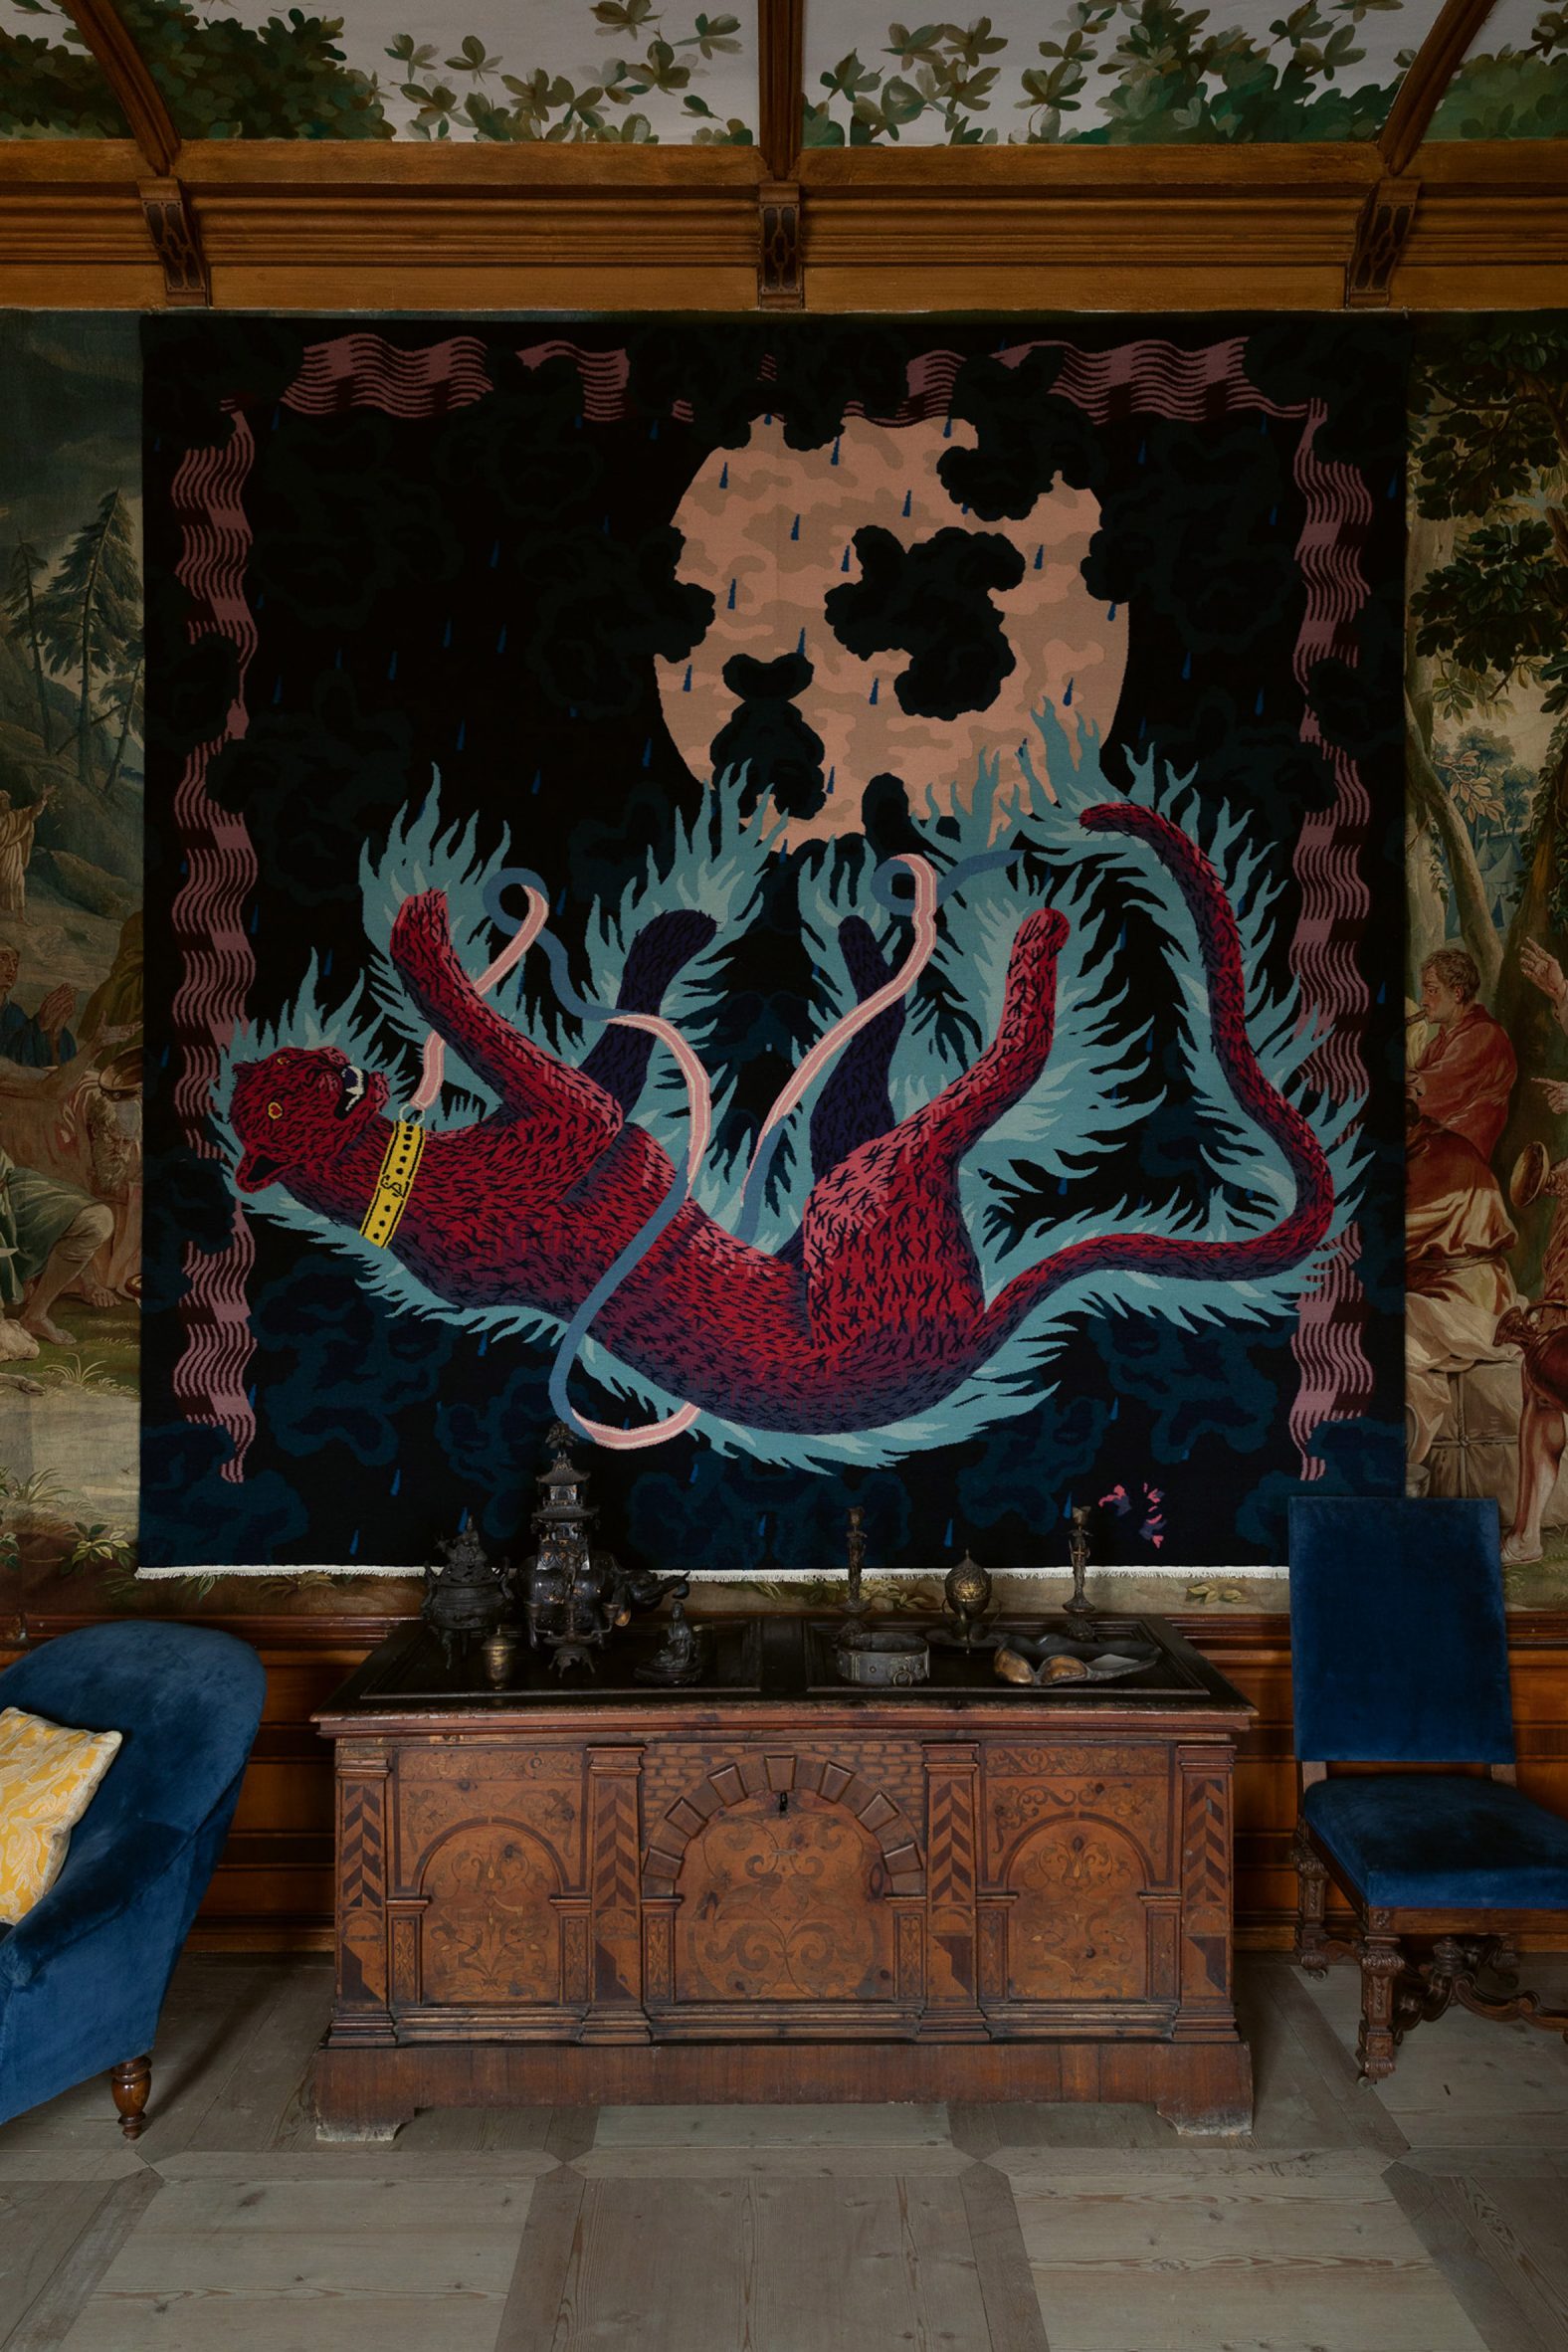 Ladislaus tapestry by Laurids Gallée hung in the East to West exhibition at Schloss Hollenegg castle